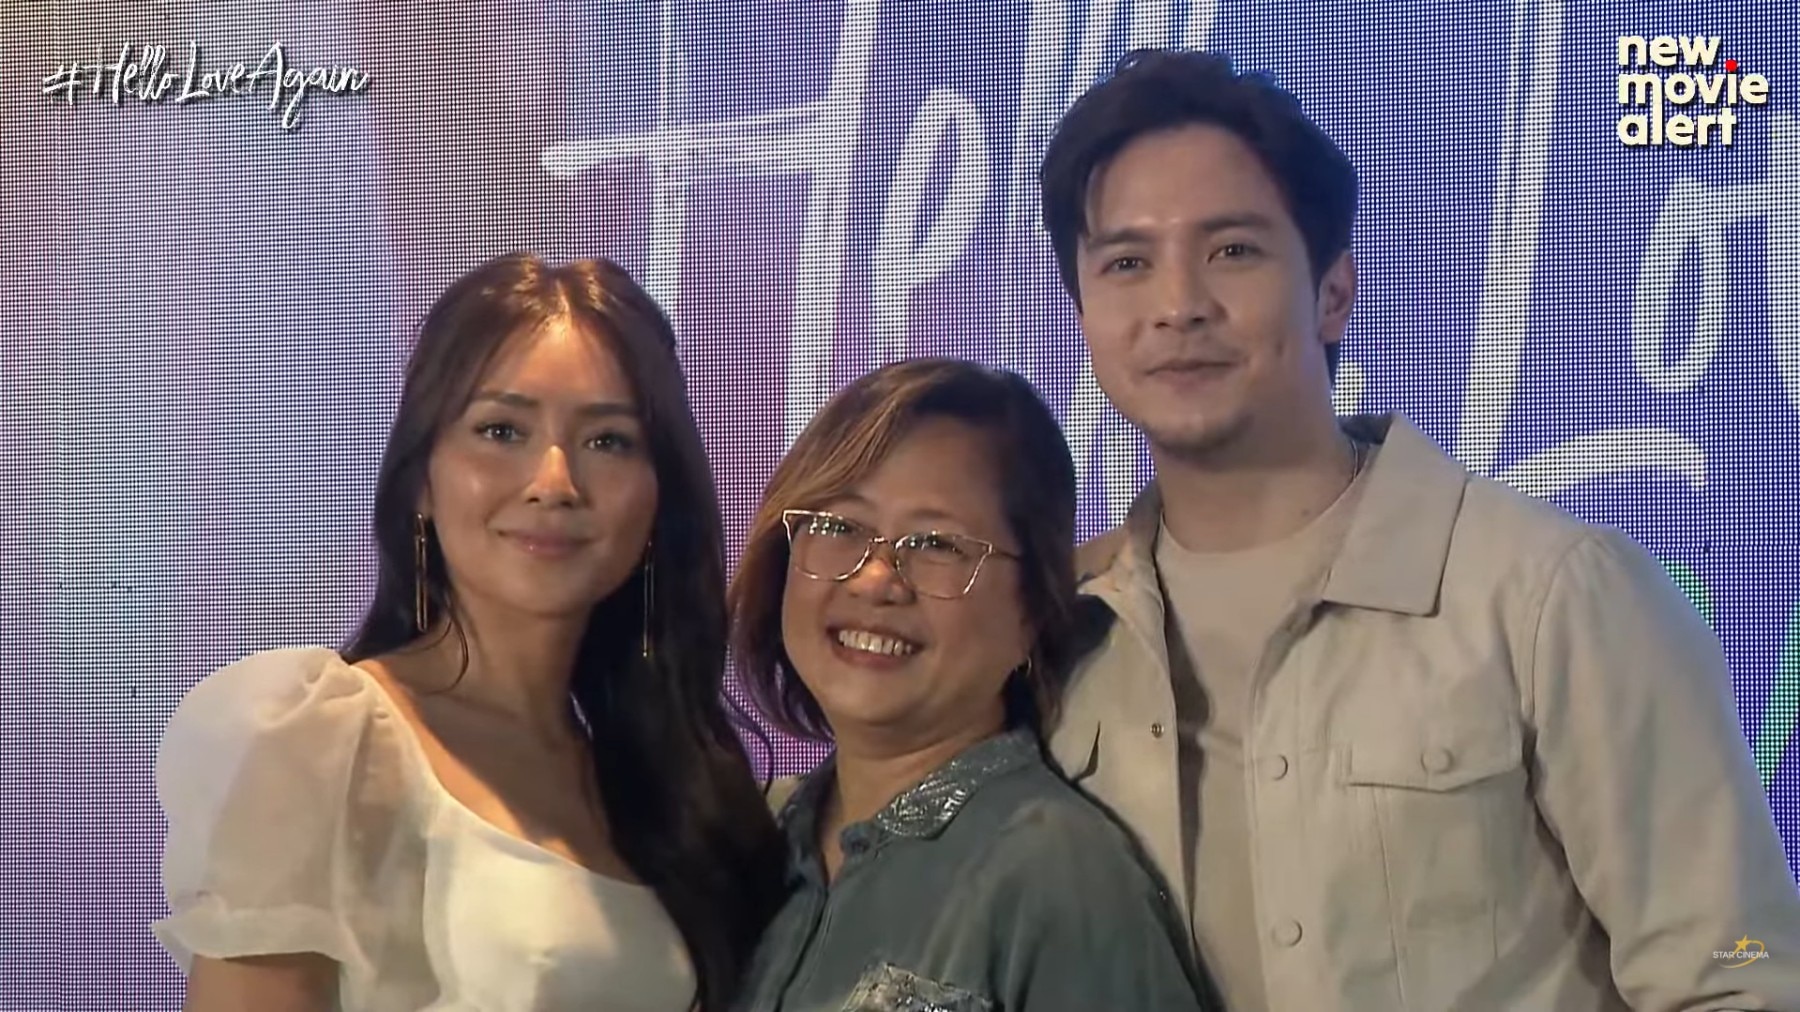 Star Cinema and GMA Pictures team up for "Hello, Love, Again"